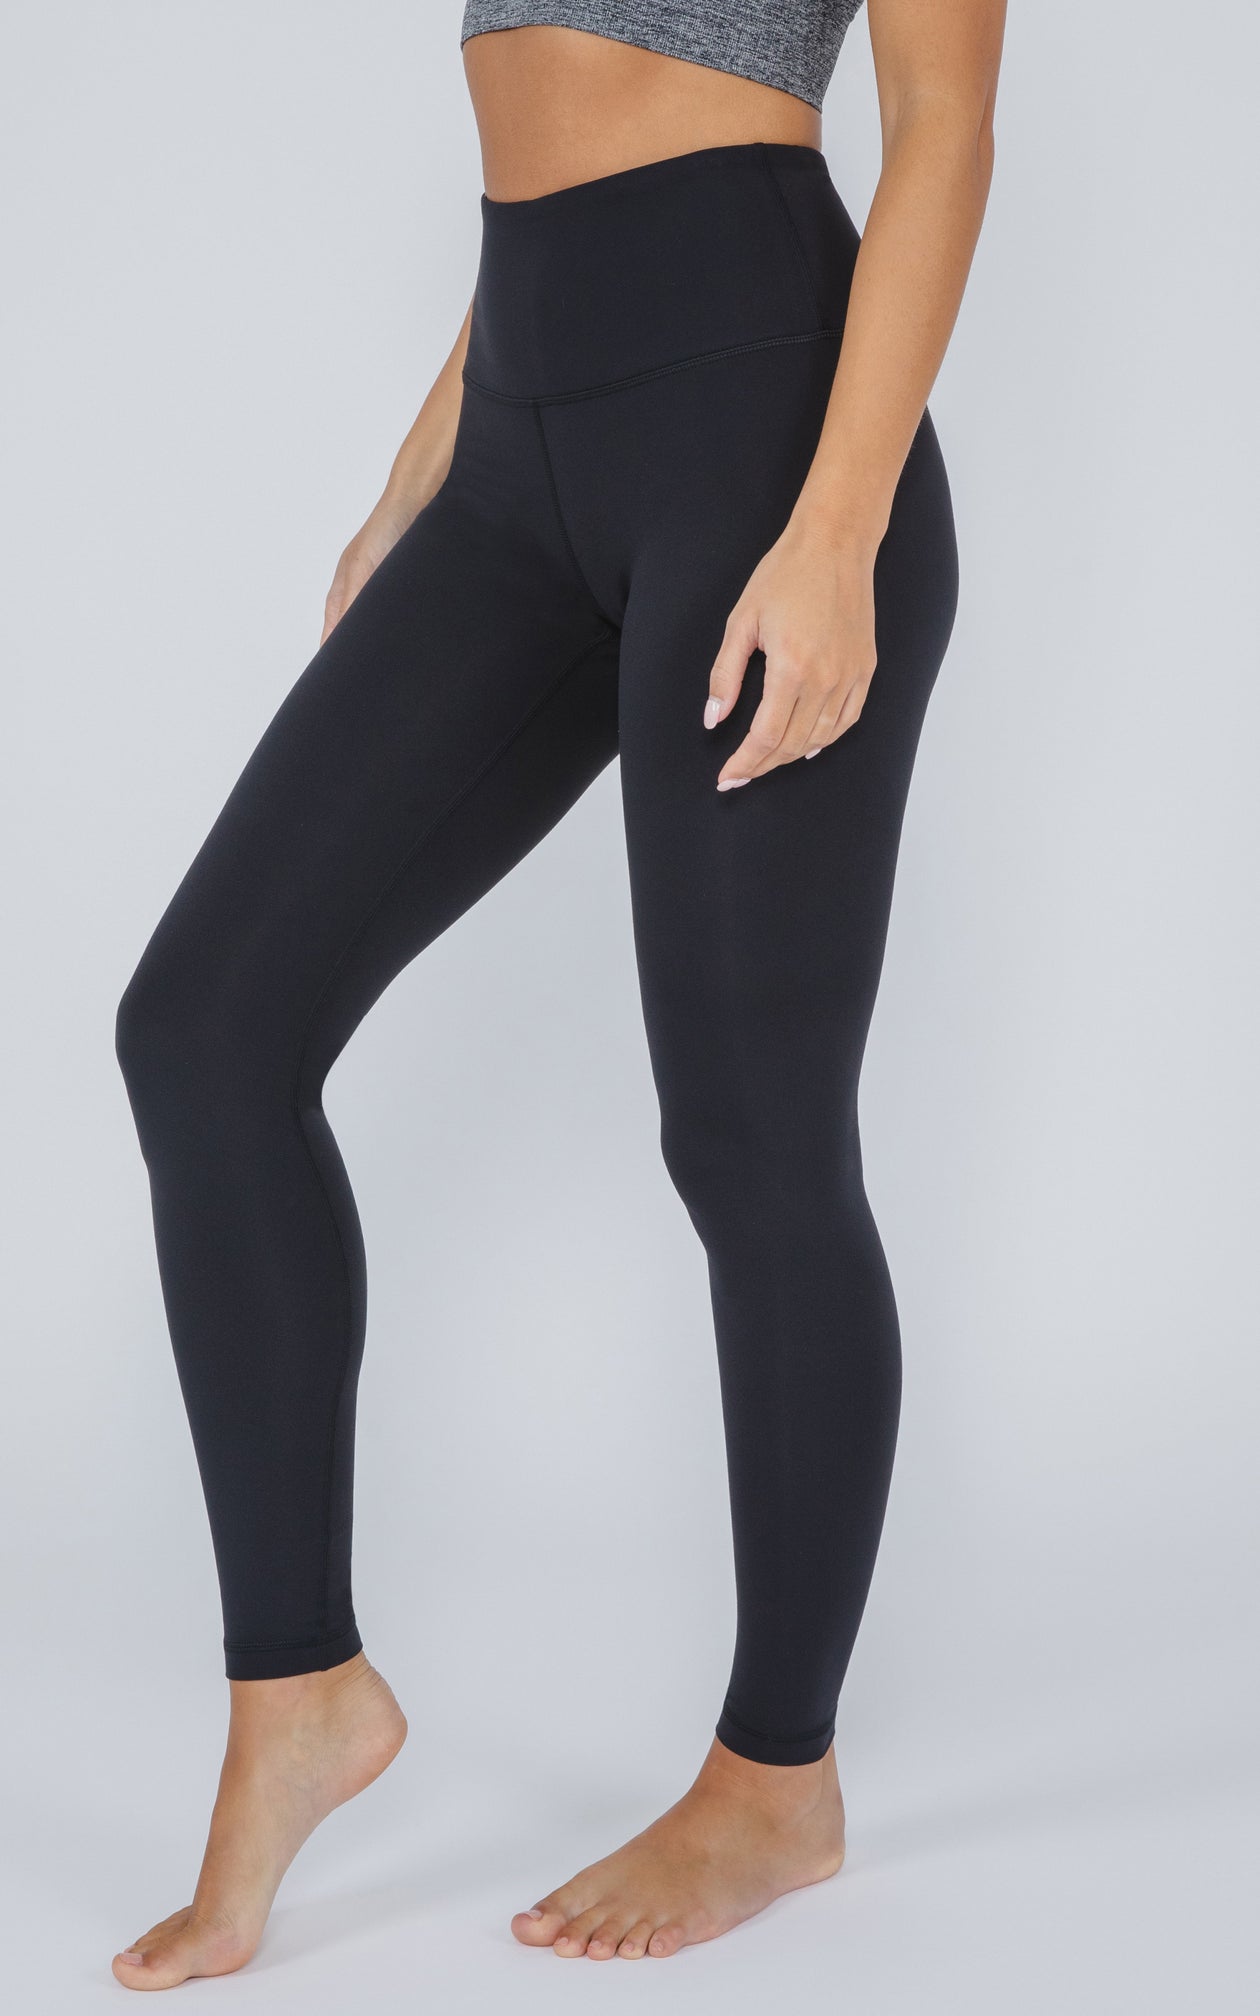 Yogalicious Women's Nude Tech Full Length Leggings With Side Pockets